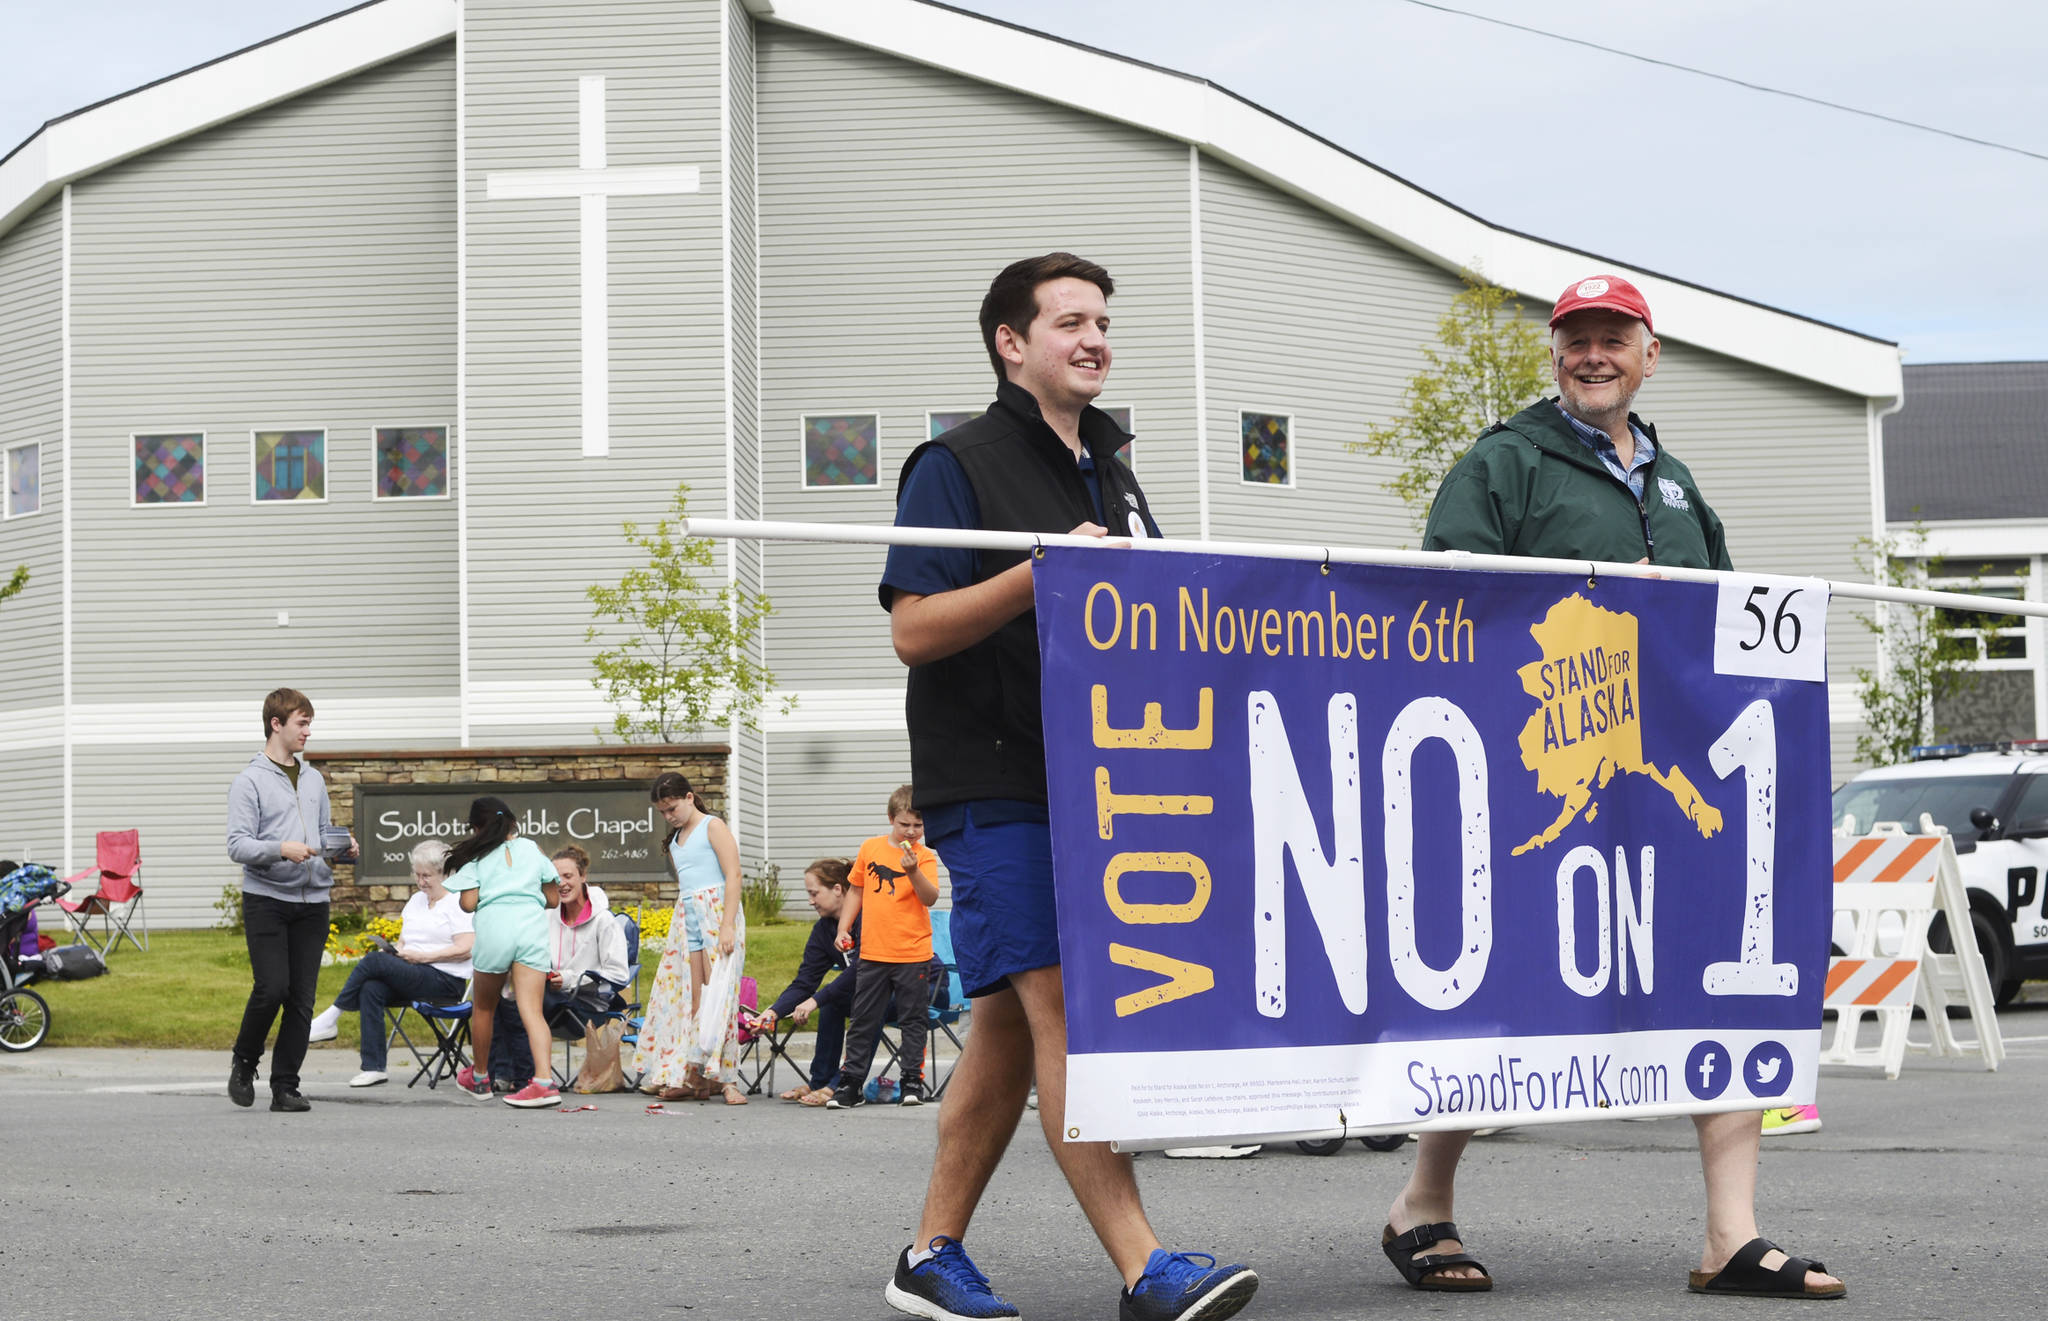 Participants in Stand for Alaska’s float in the Progress Days parade make their way down Marydale Avenue on Saturday, July 28, 2018 in Soldotna, Alaska. The parade kicks off the weekend-long event celebrating Soldotna’s history, with a market on Saturday and Sunday in Soldotna Creek Park and a concert Saturday night followed by a free community barbecue Sunday. (Photo by Elizabeth Earl/Peninsula Clarion)